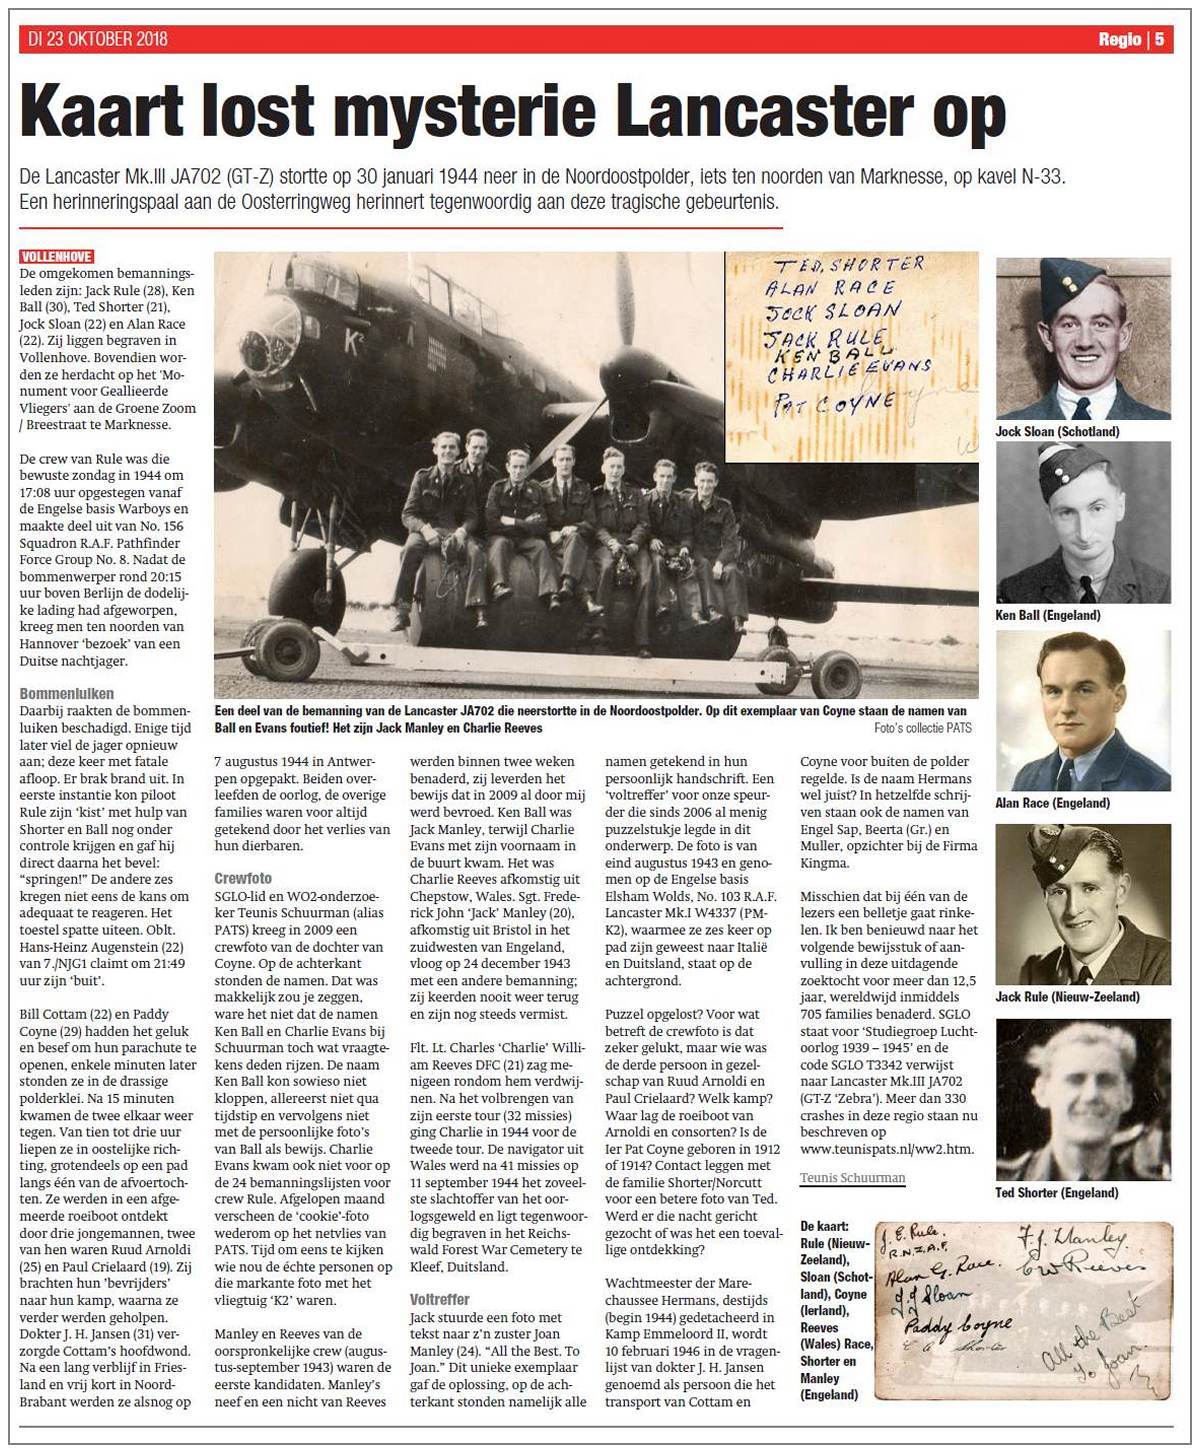 23 Oct 2018 - article about finding of the right names of the original crew Rule (Aug 1943)